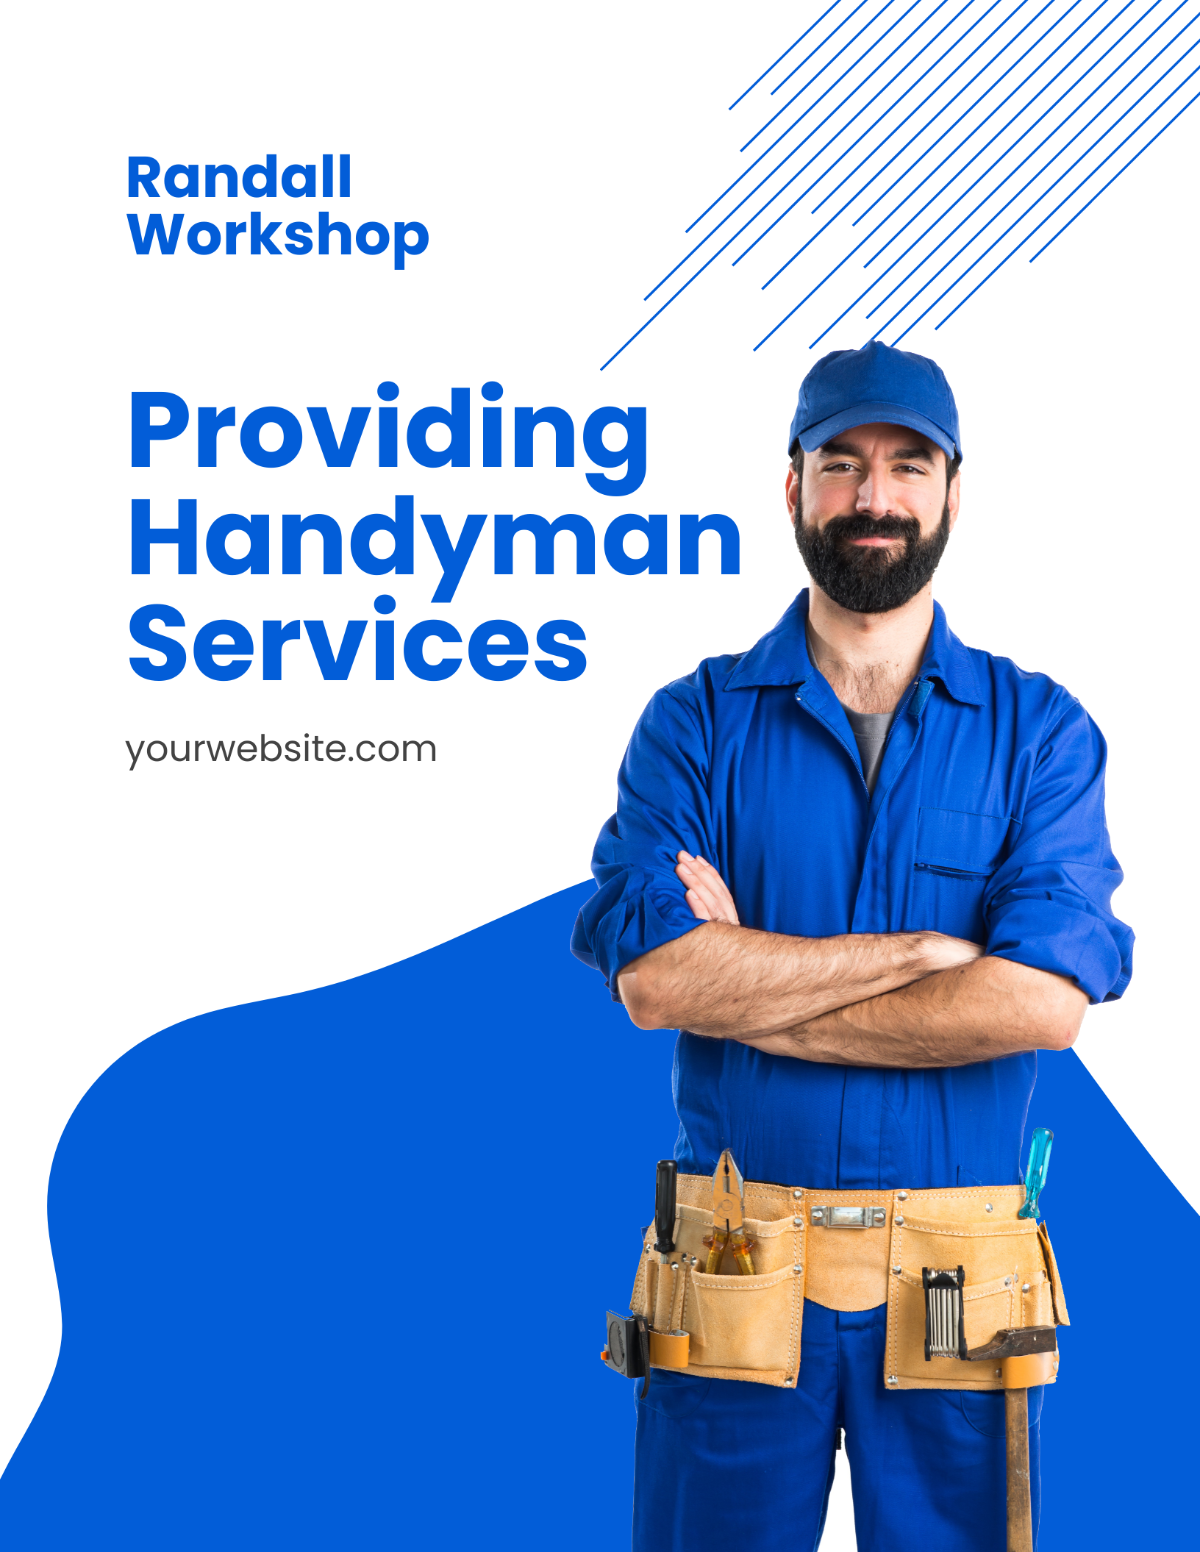 Professional Handyman Services Flyer Template